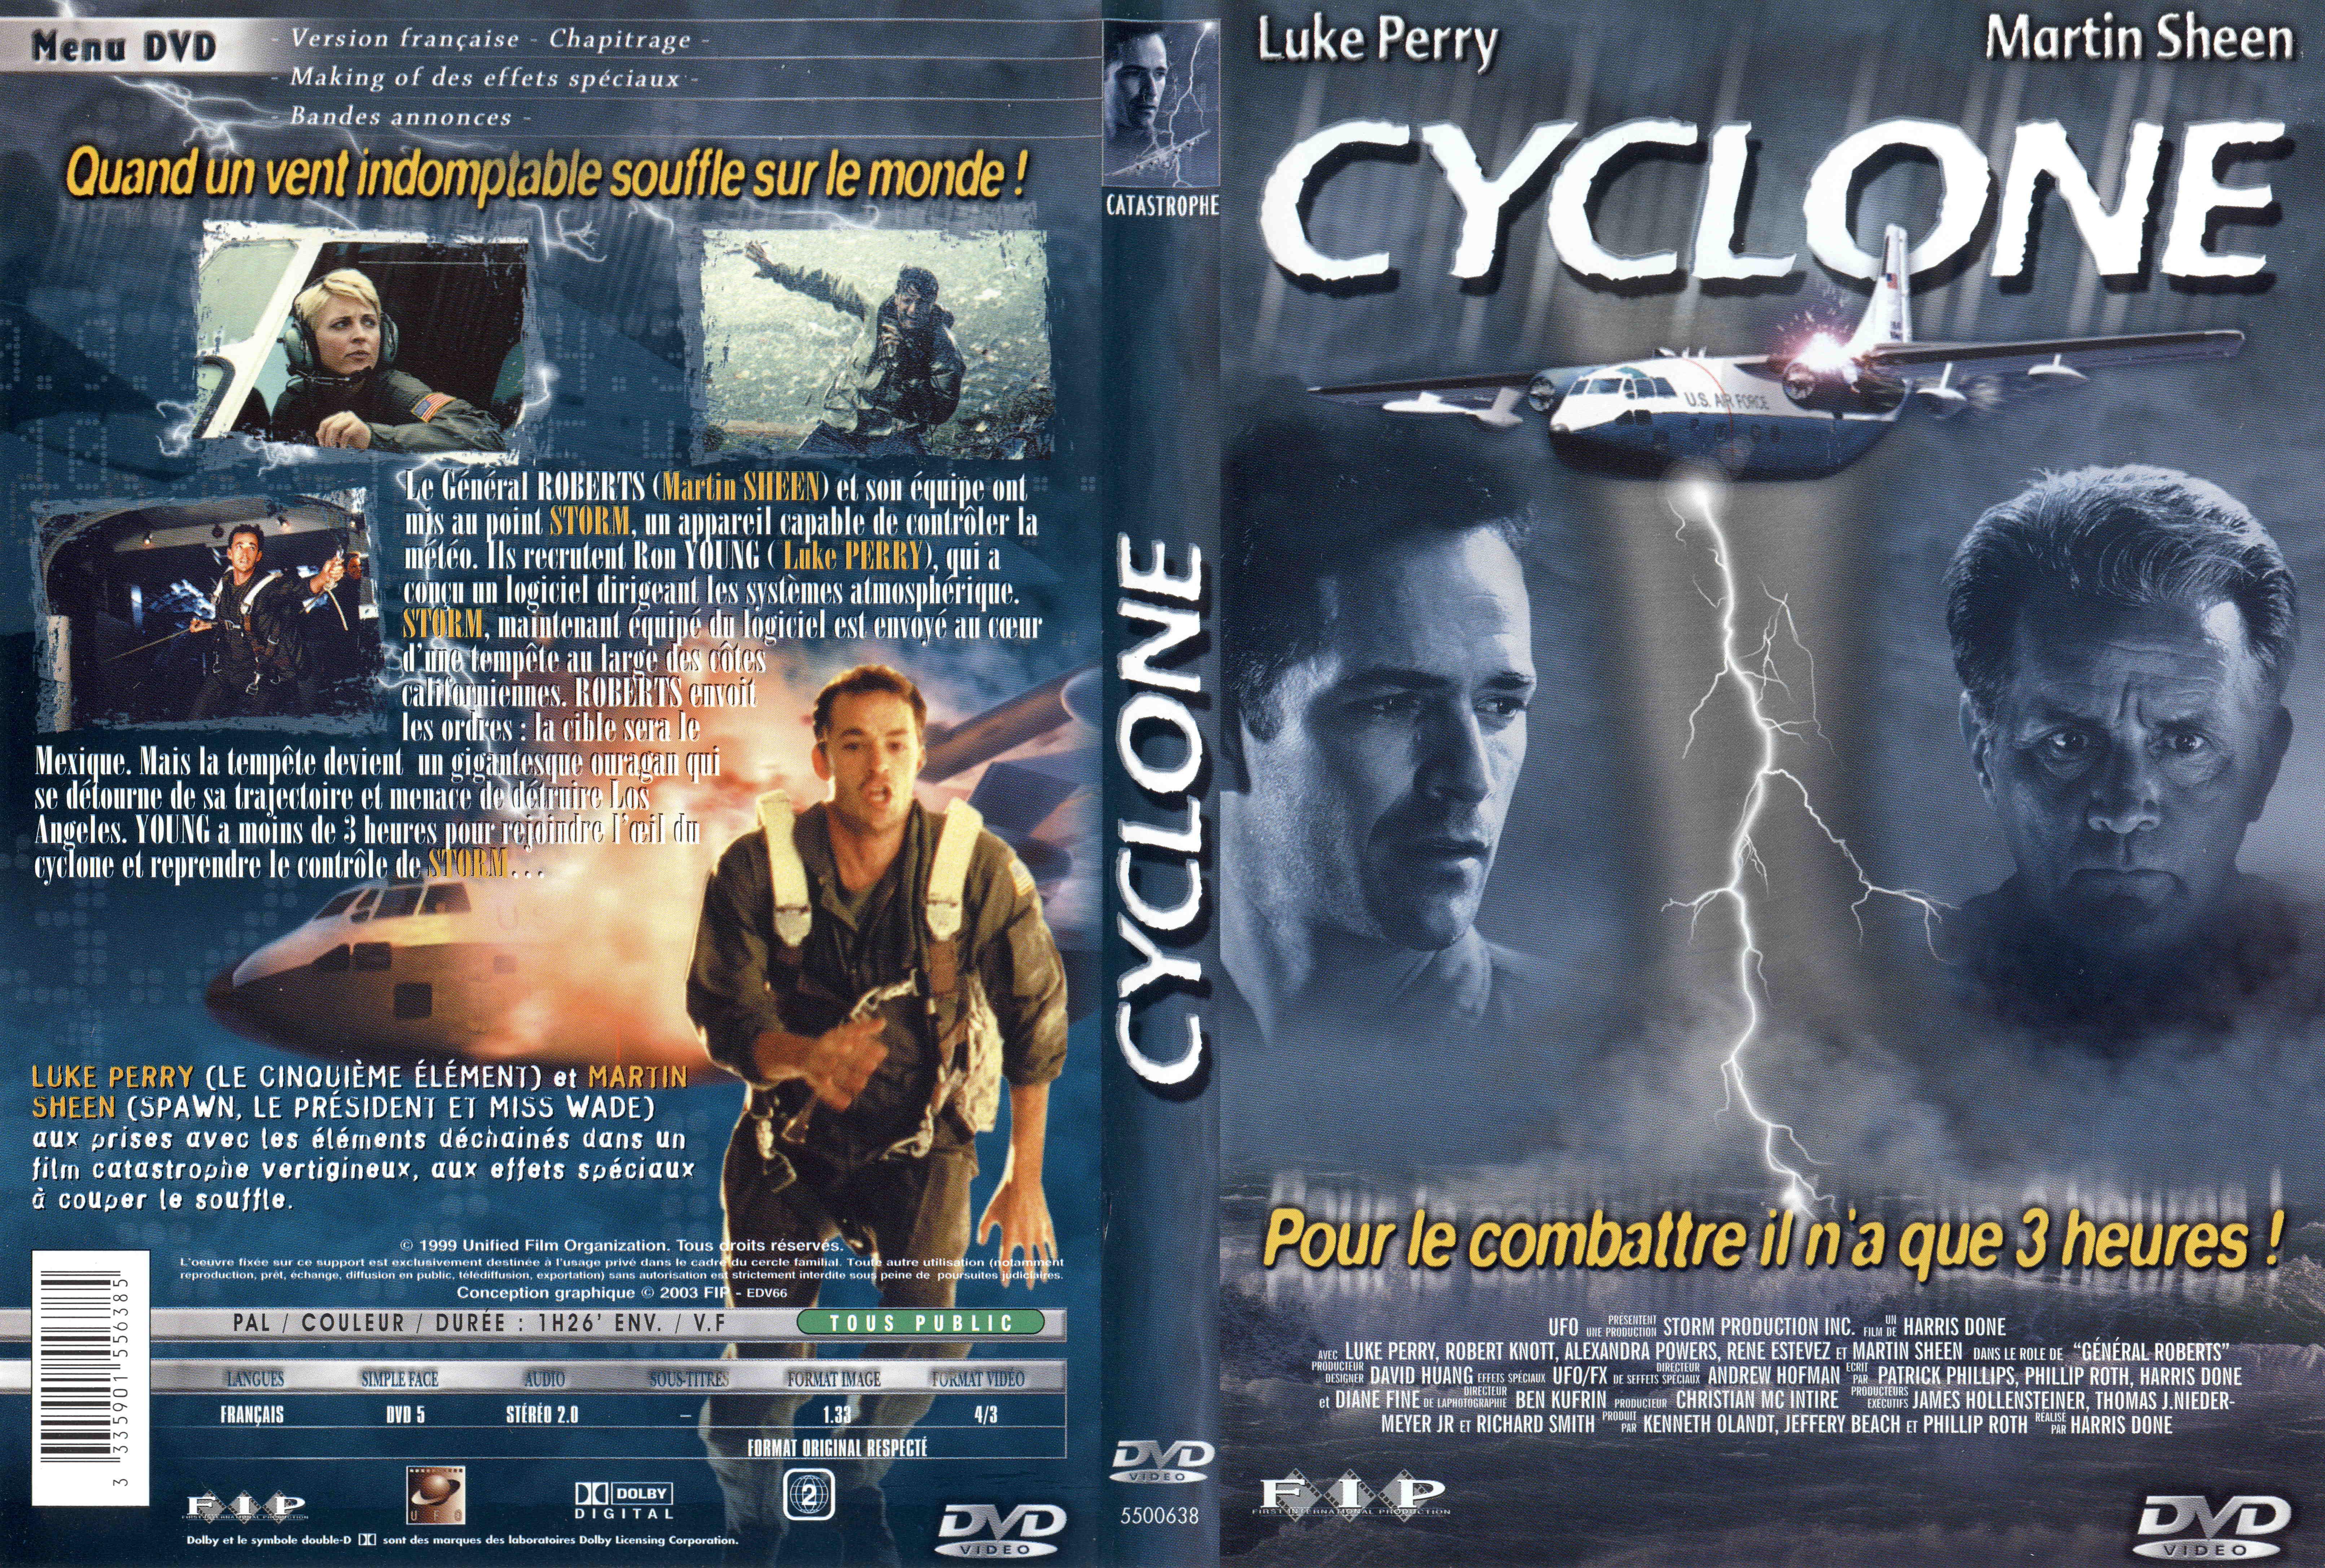 Jaquette DVD Cyclone (1999)